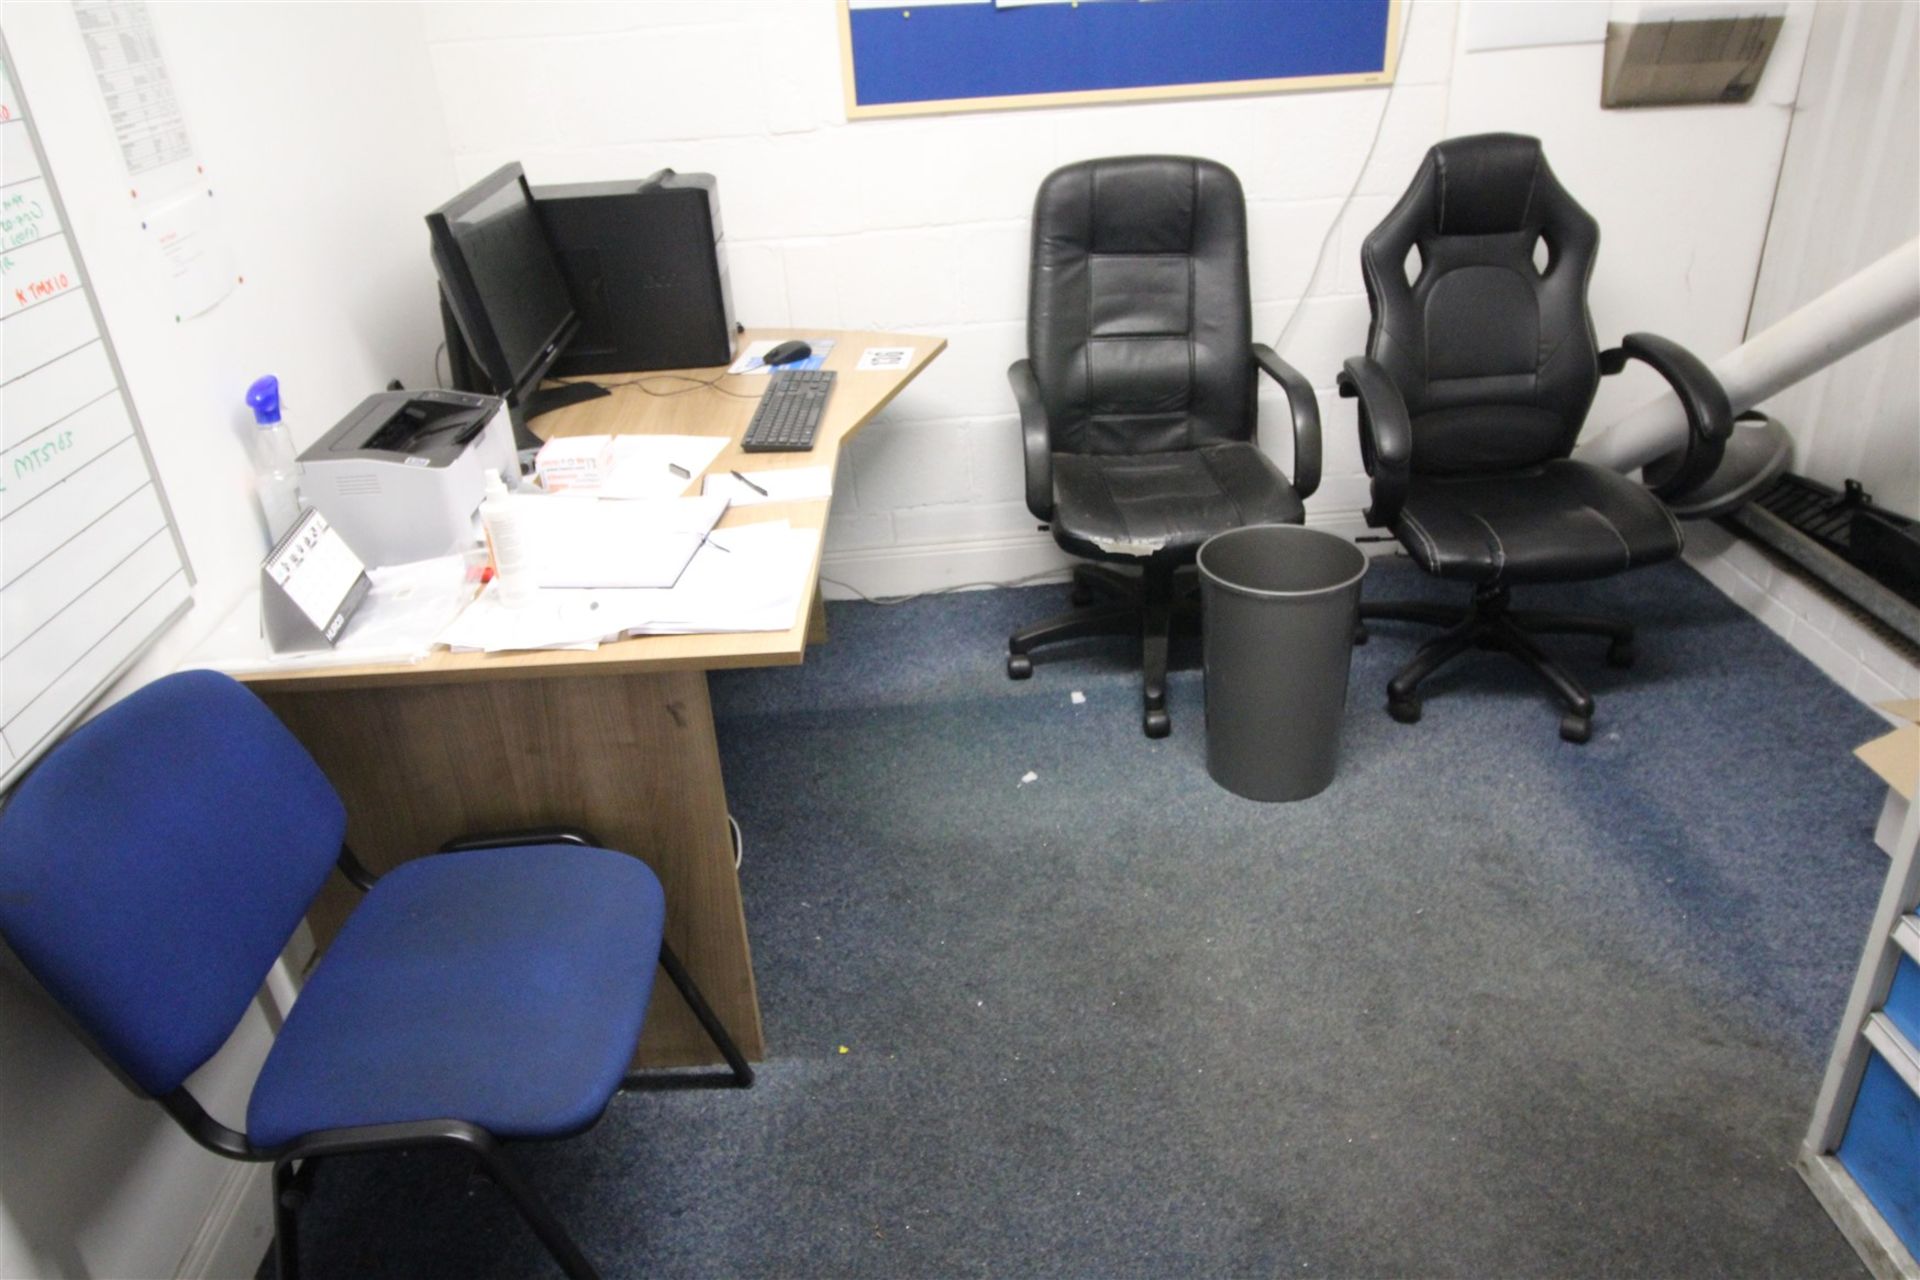 2x Black Swivel Armchairs, Blue Metal Framed Chair, 5' Shaped Desk, 2x Wall Boards, and Grey Waste